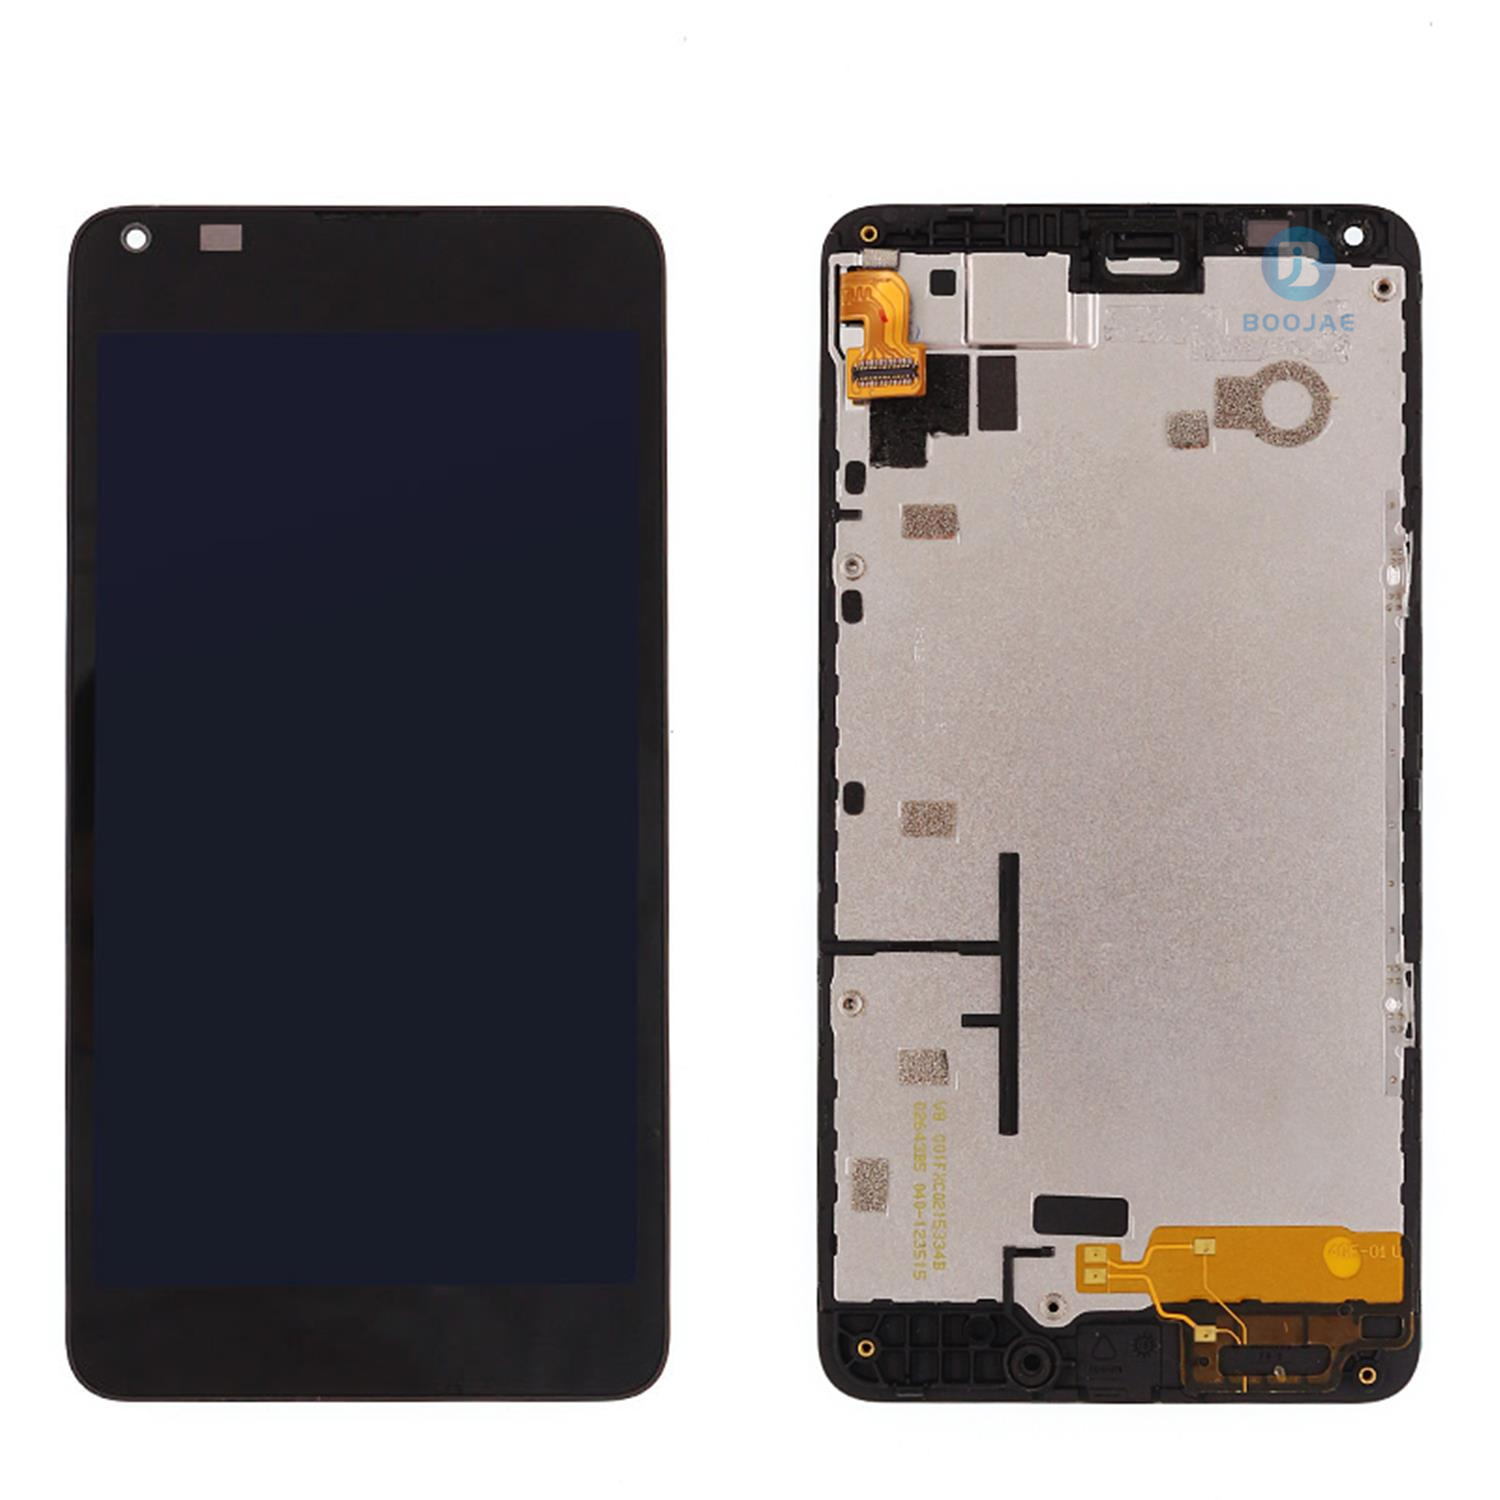 For Nokia Lumia 640 LCD Screen Display and Touch Panel Digitizer Assembly Replacement